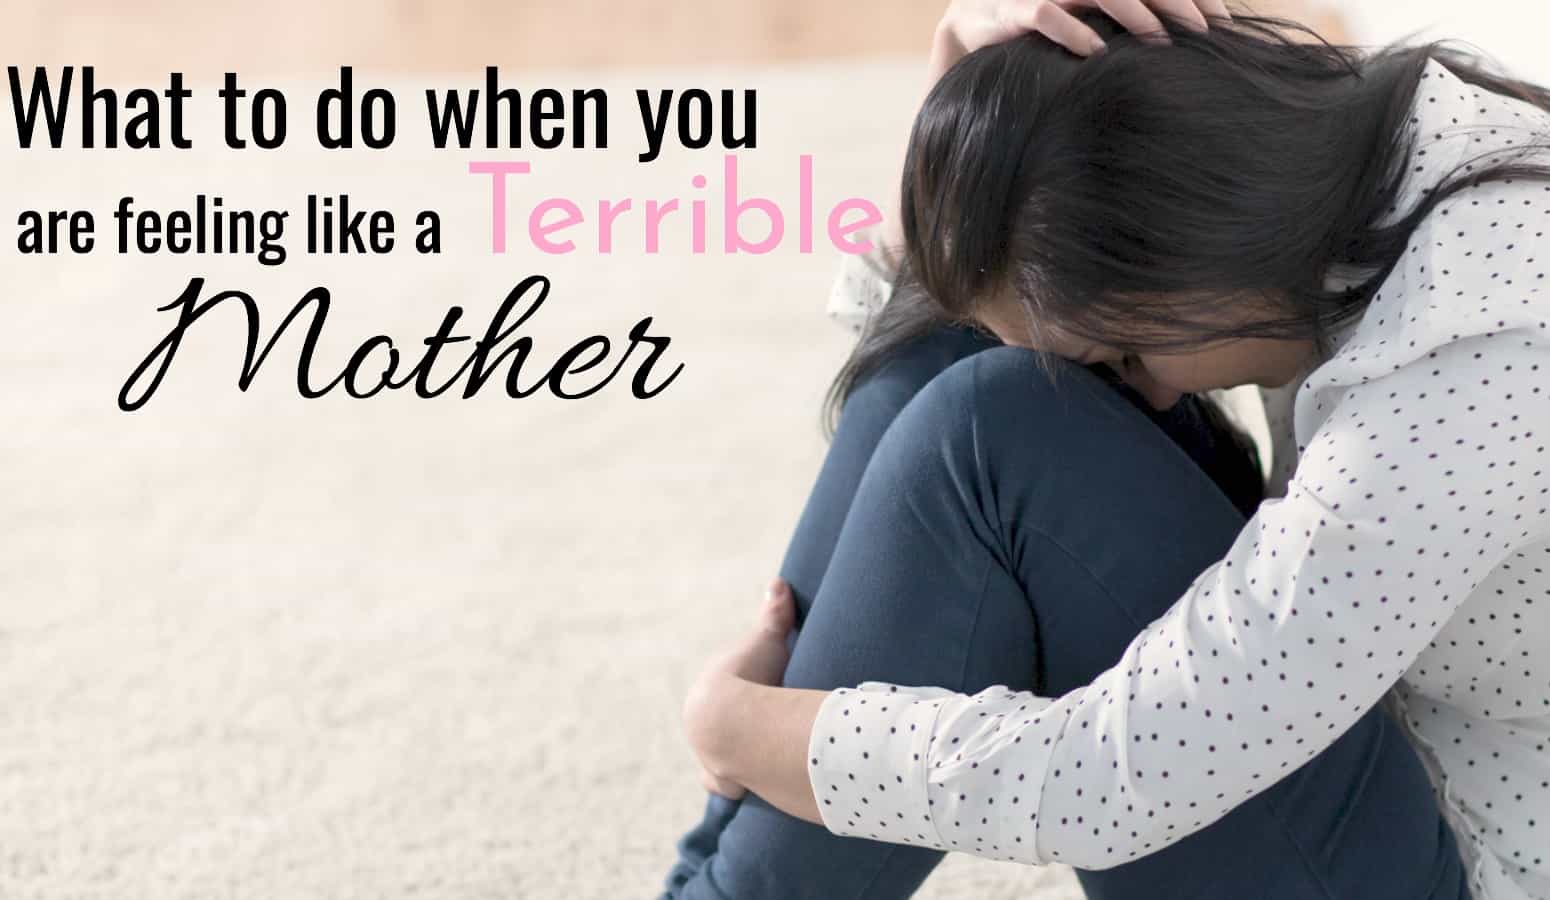 What To Do When You Are Feeling Like a Terrible Mother.